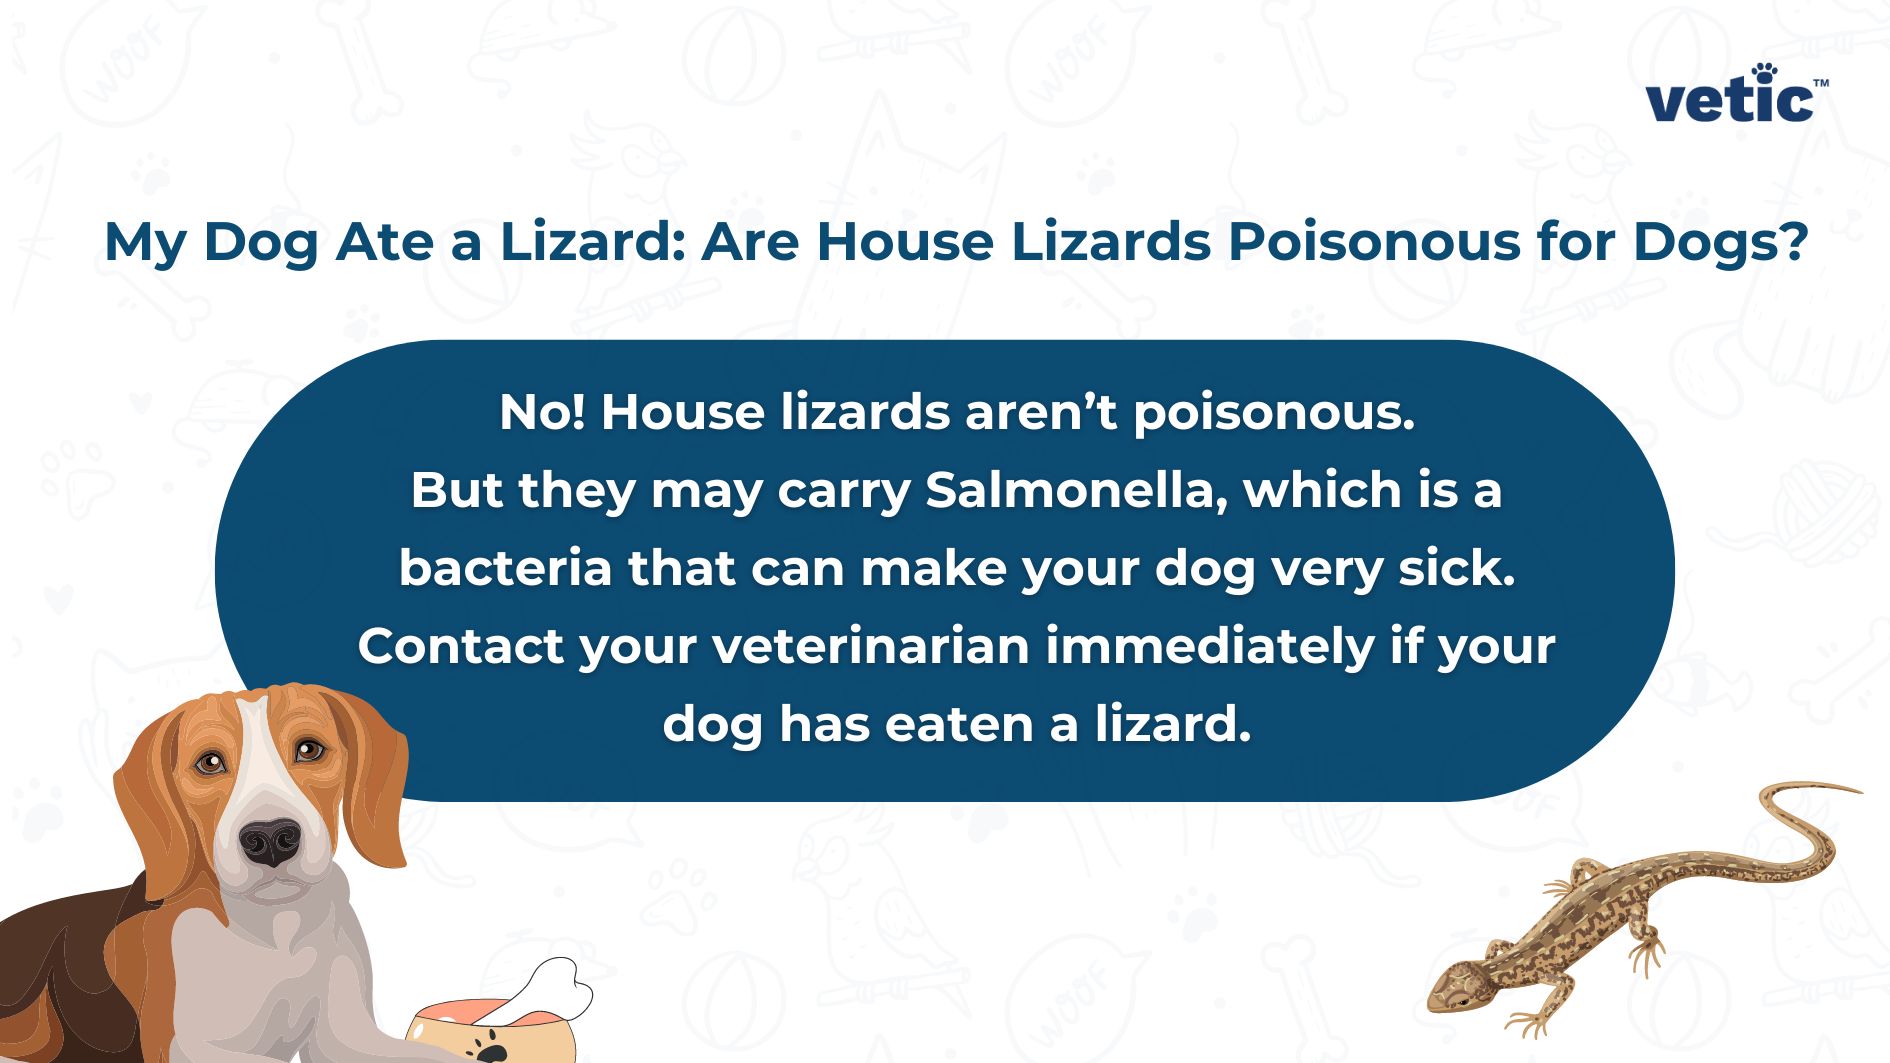 Infographic by Vetic on “My Dog Ate a Lizard: Are House Lizards Poisonous for Dogs?” It clarifies that house lizards are not poisonous but may carry Salmonella. The advice given is for dog owners to contact their veterinarian if their dog eats a lizard, highlighting the importance of professional guidance in such situations.